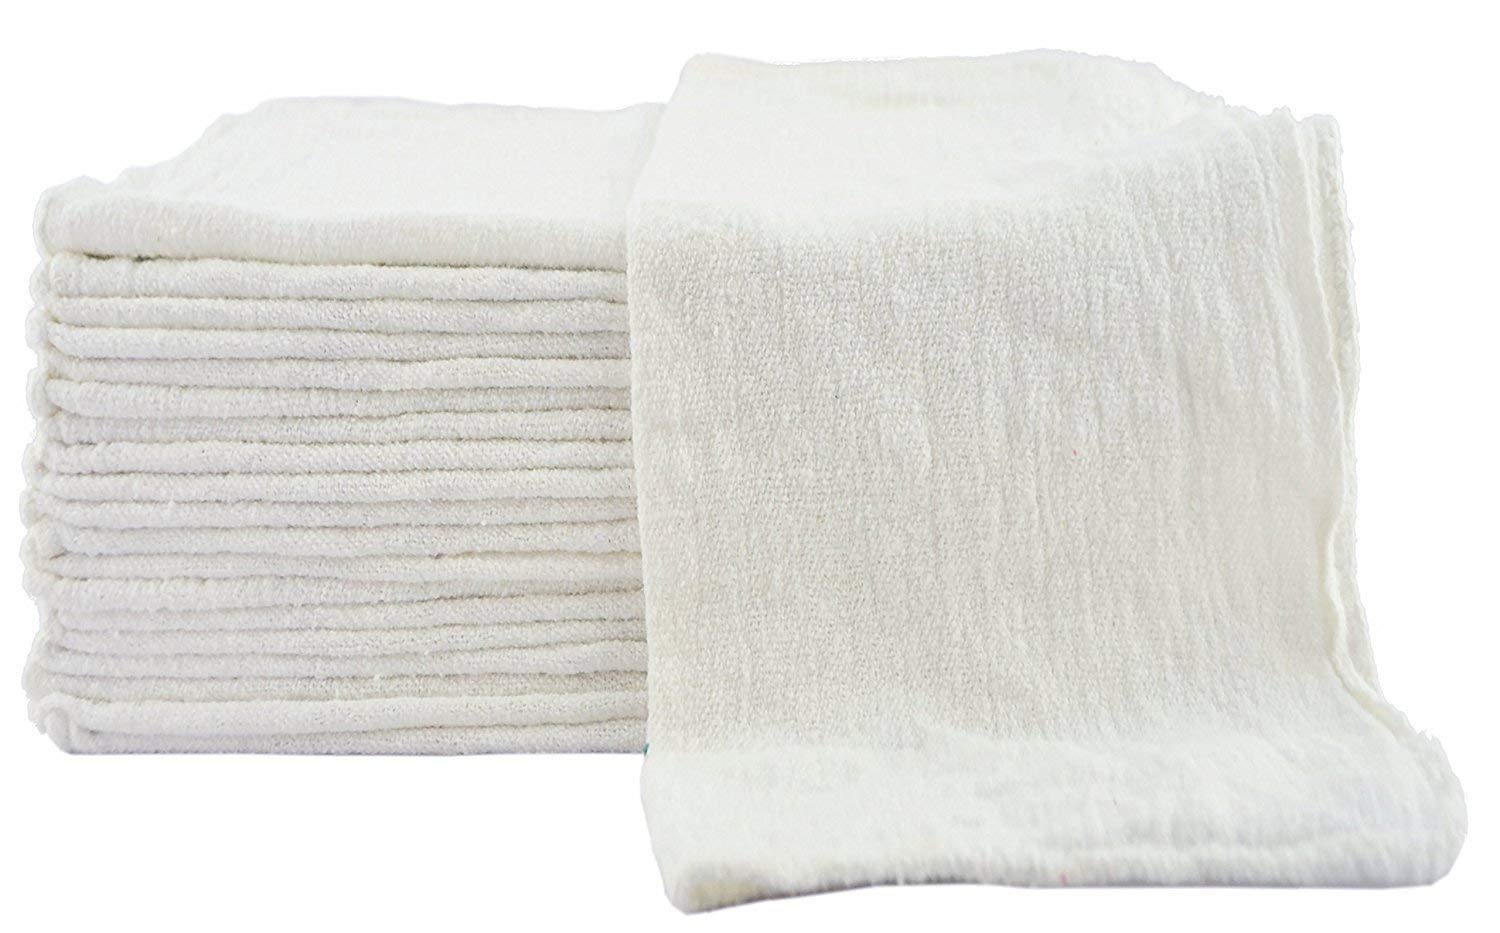 utopia towels cleaning cloths